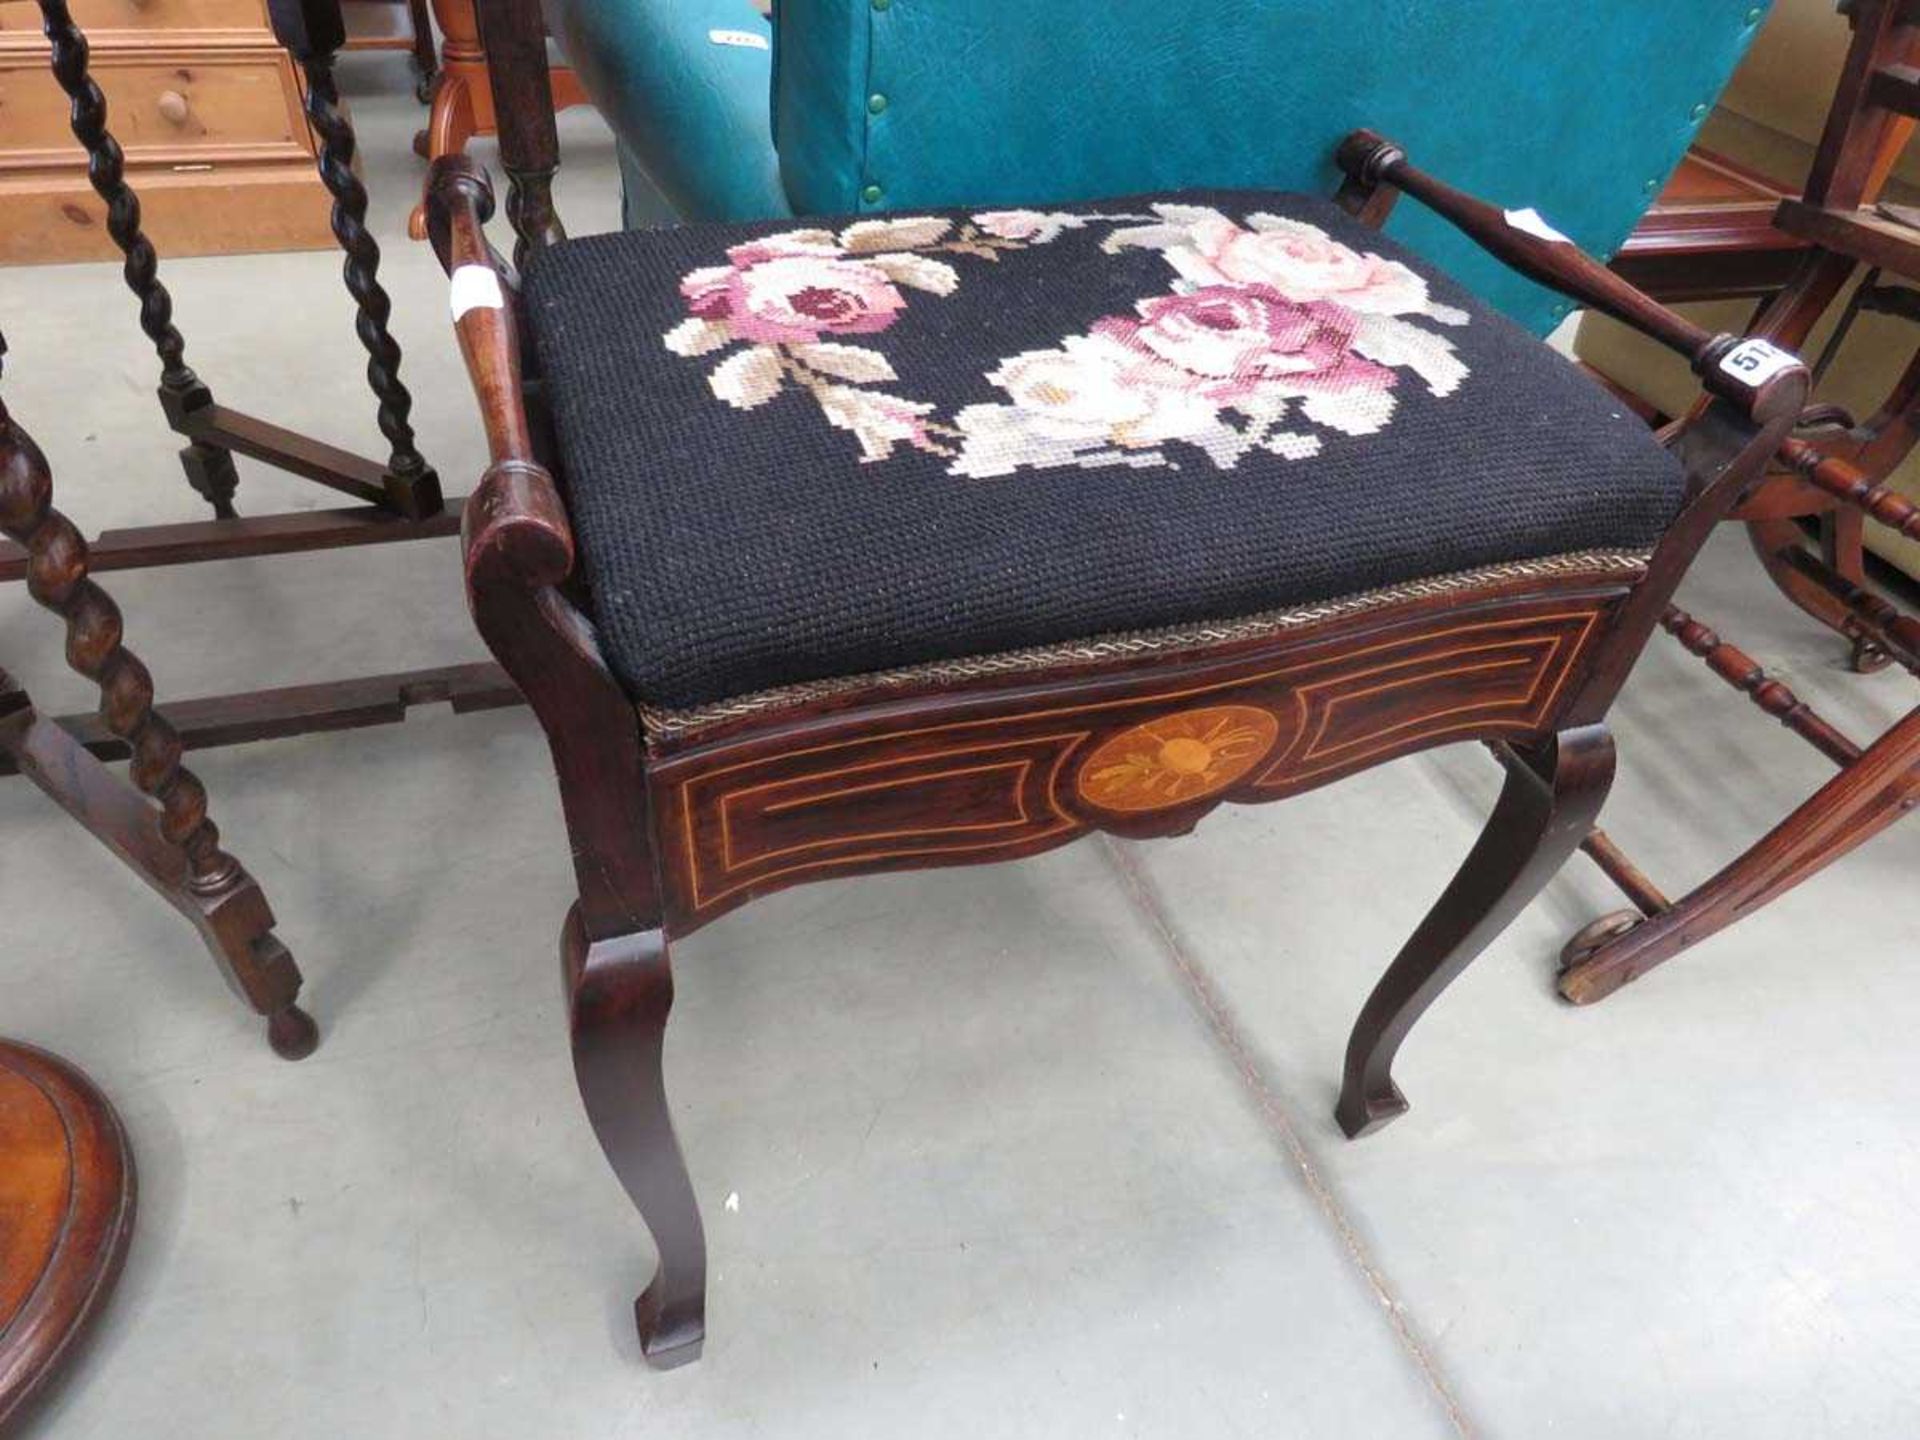 Piano stool with embroidered seat